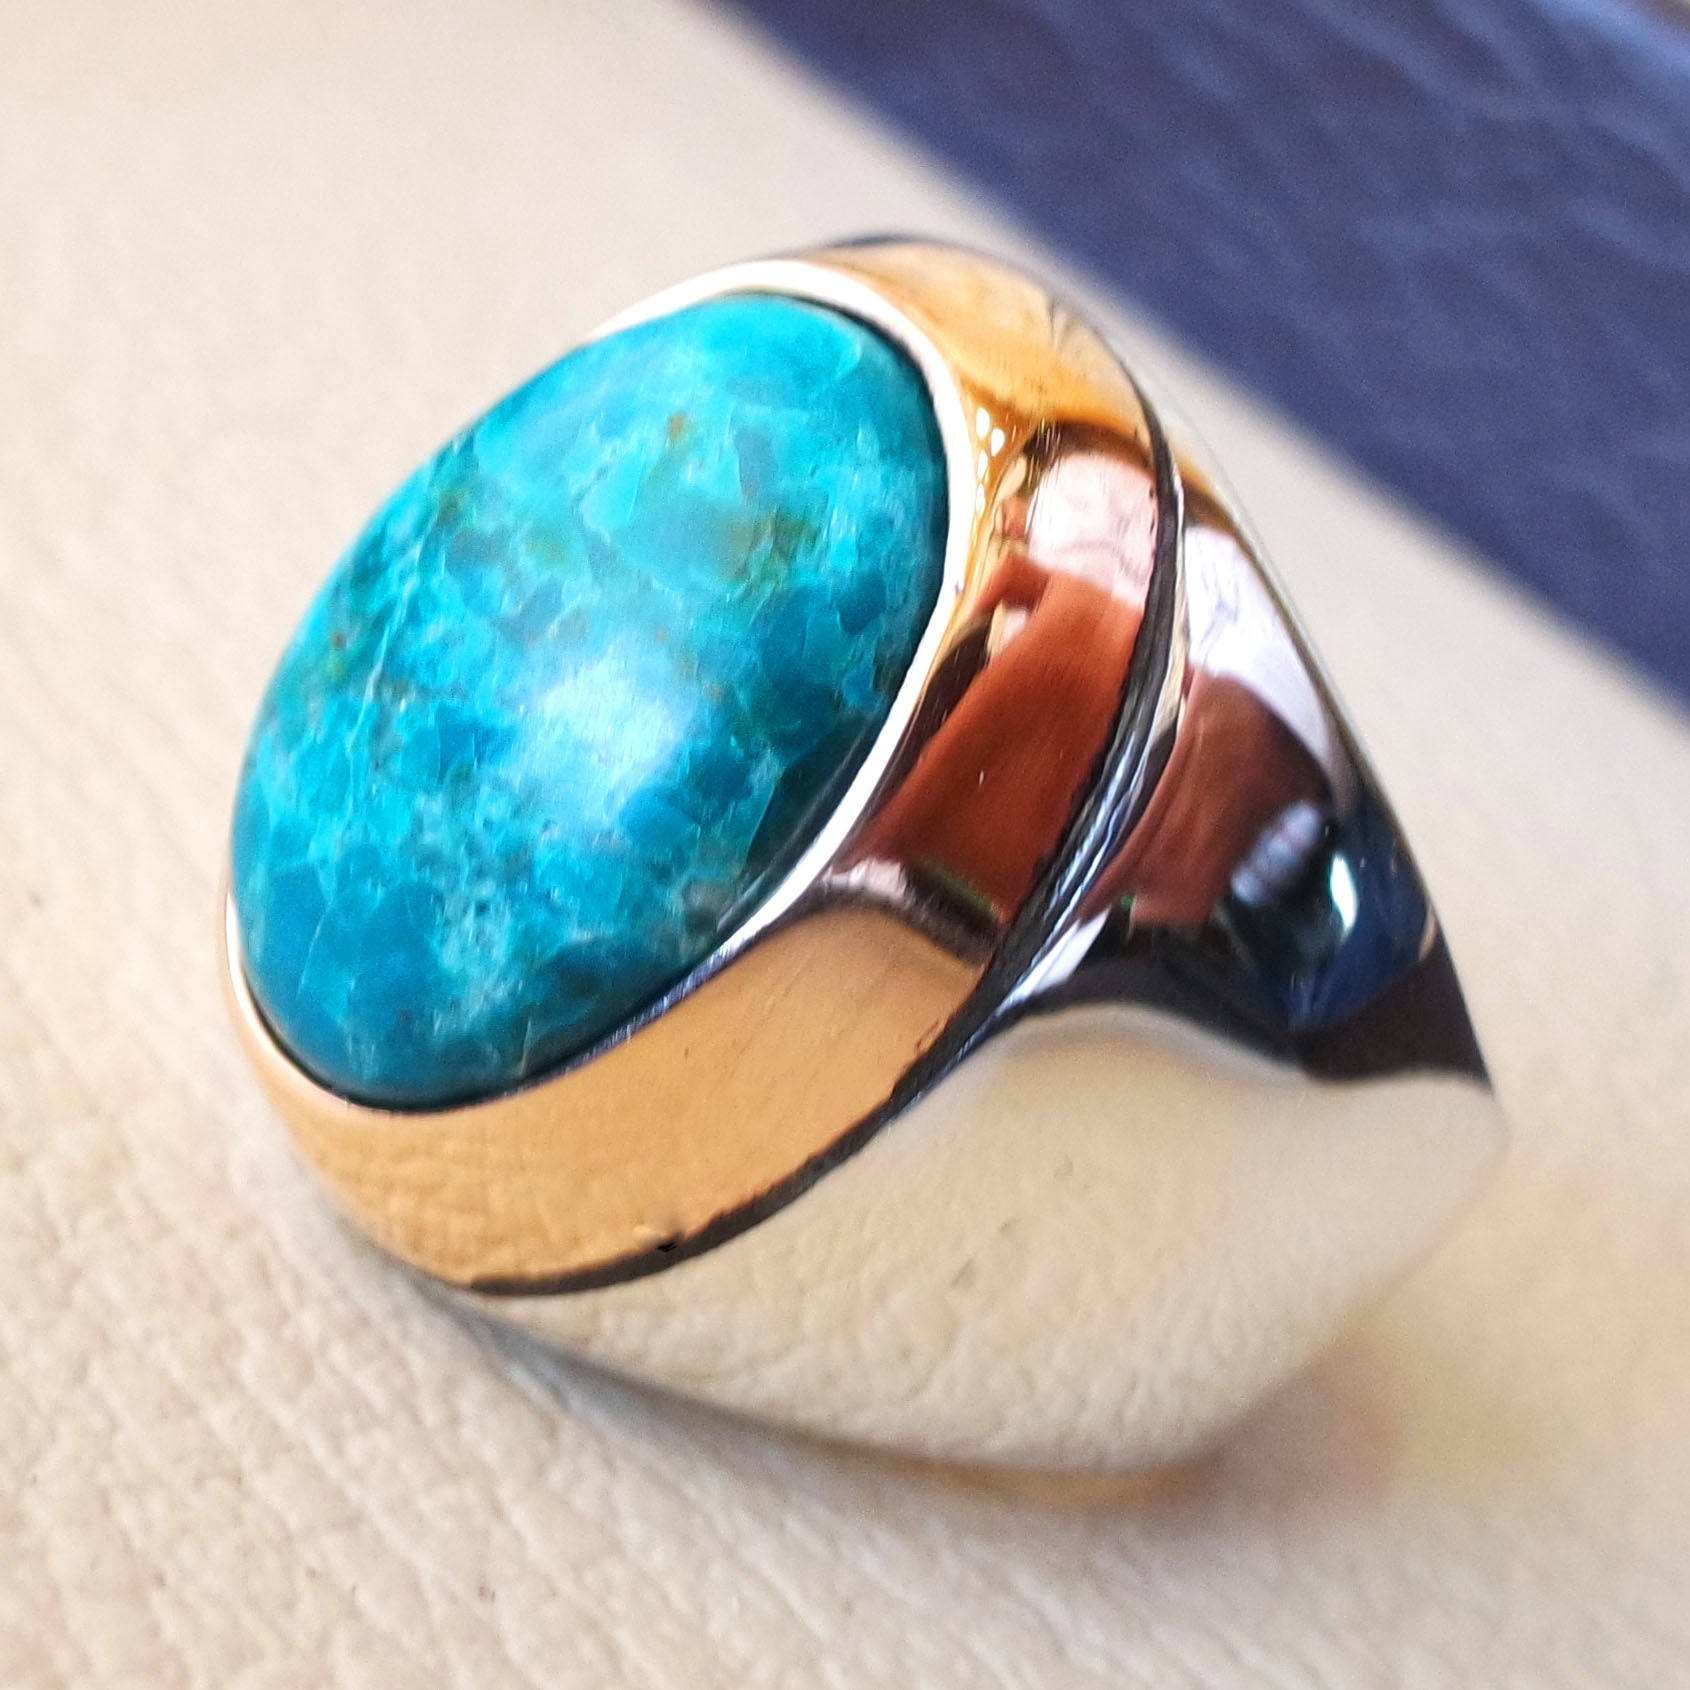 man ring chryscolla natural stone sterling silver 925 and bronze oval cabochon semi precious blue gem ottoman arabic style all sizes jewelry